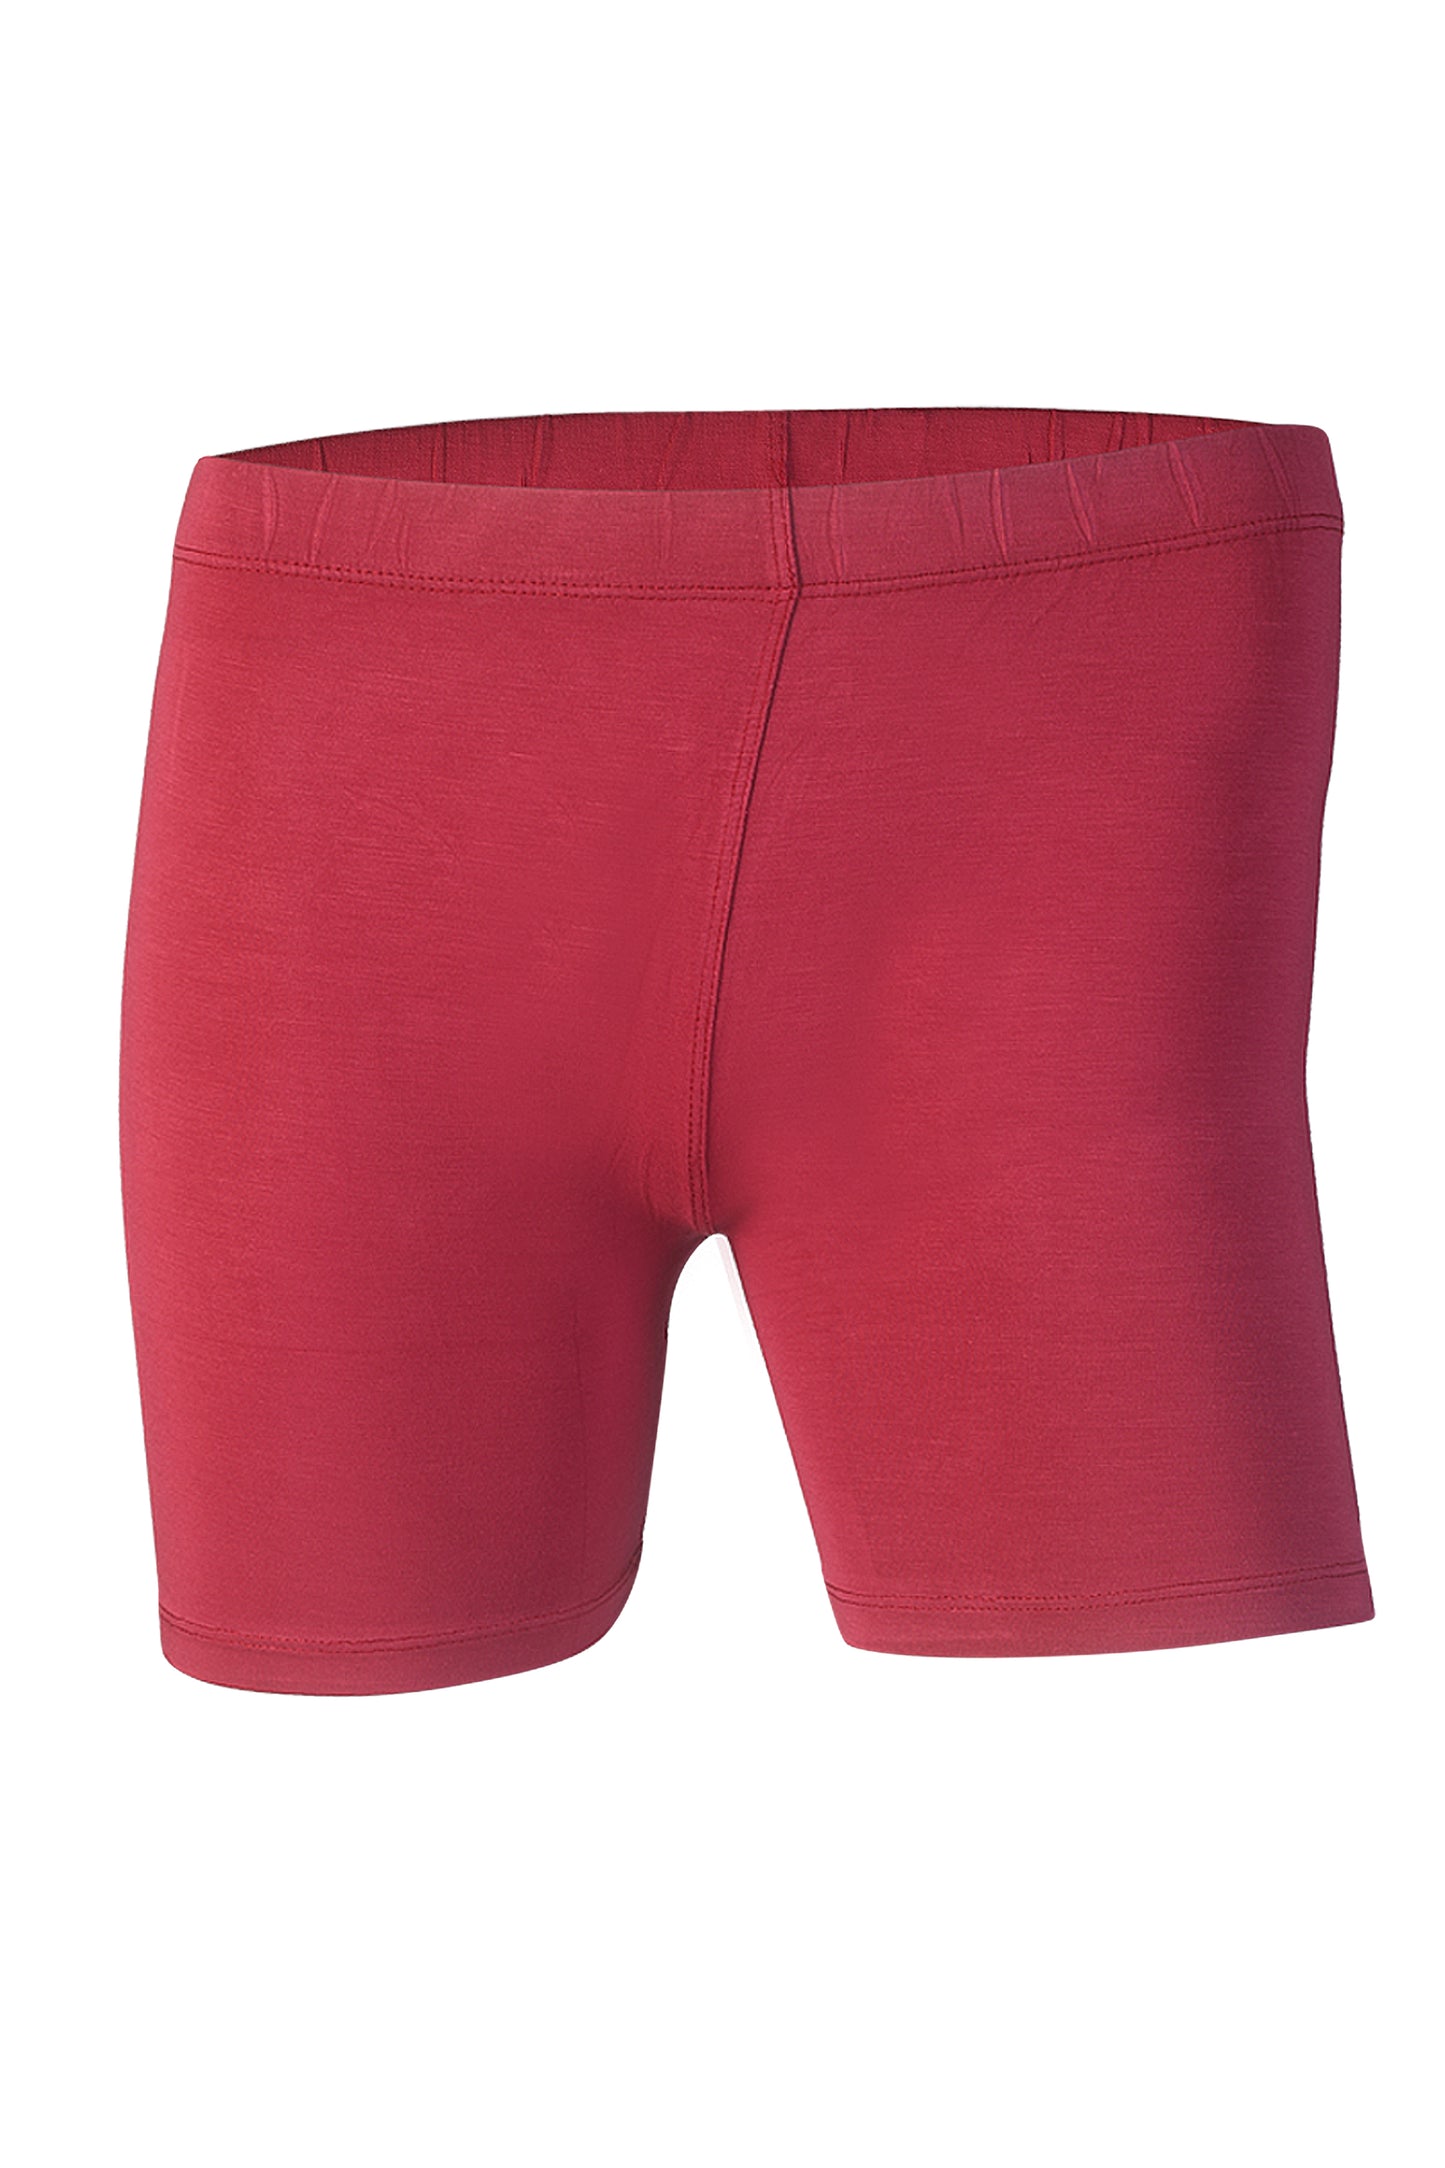 WOMEN'S SOLID INNER & OUTER WEAR ACTIVE HOT SHORTS